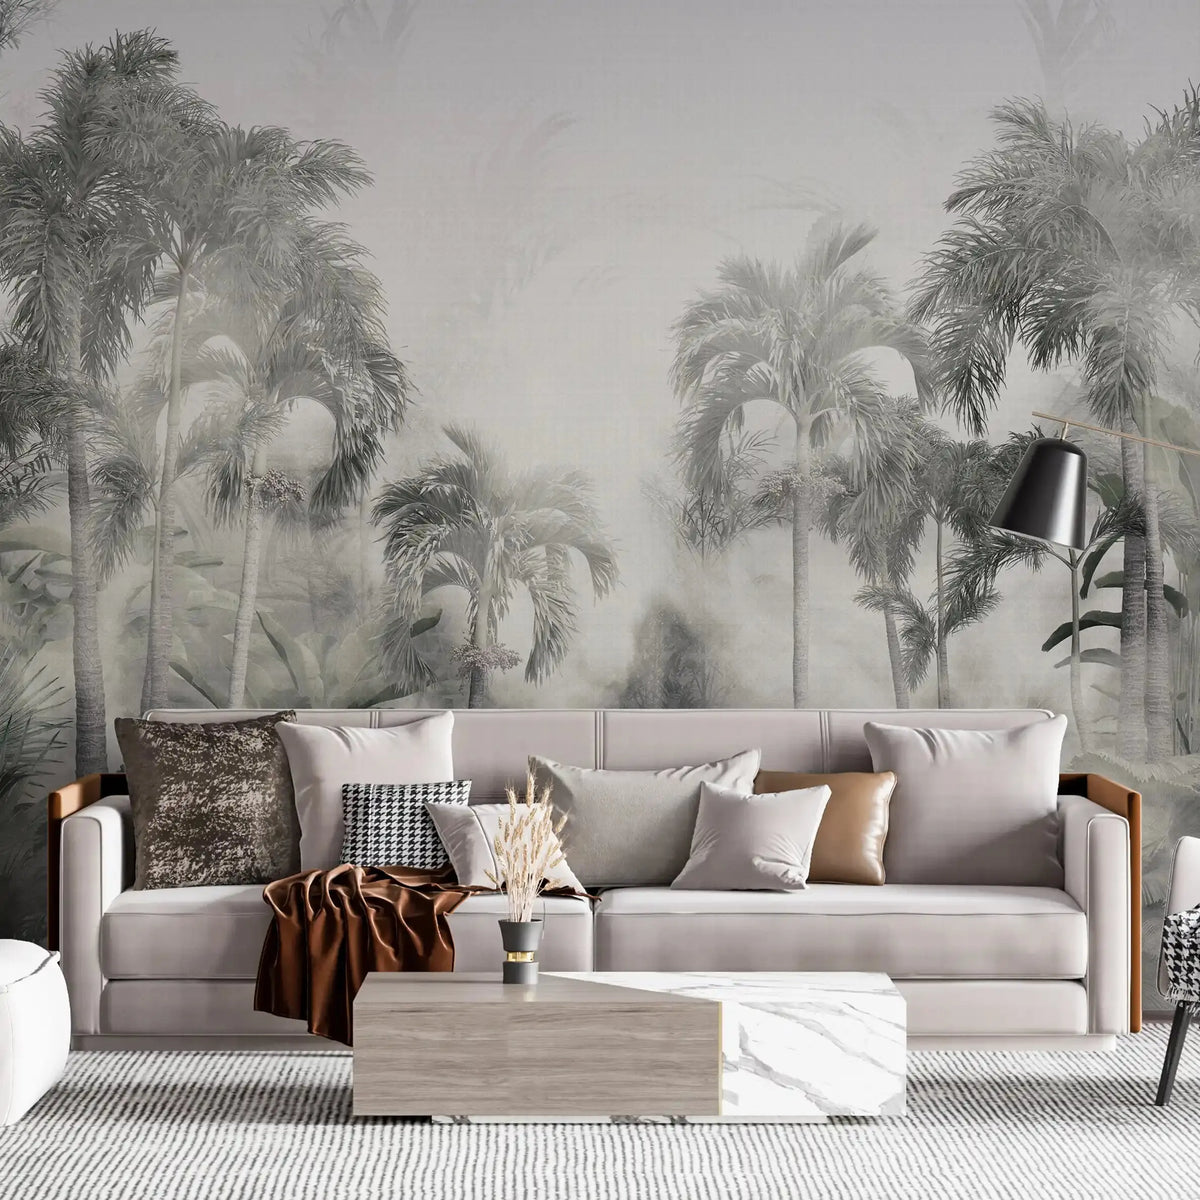 3029-A / Temporary Wallpaper: Tropical Jungle in Foggy Watercolor, Peel and Stick for Renters and DIY Deco - Artevella